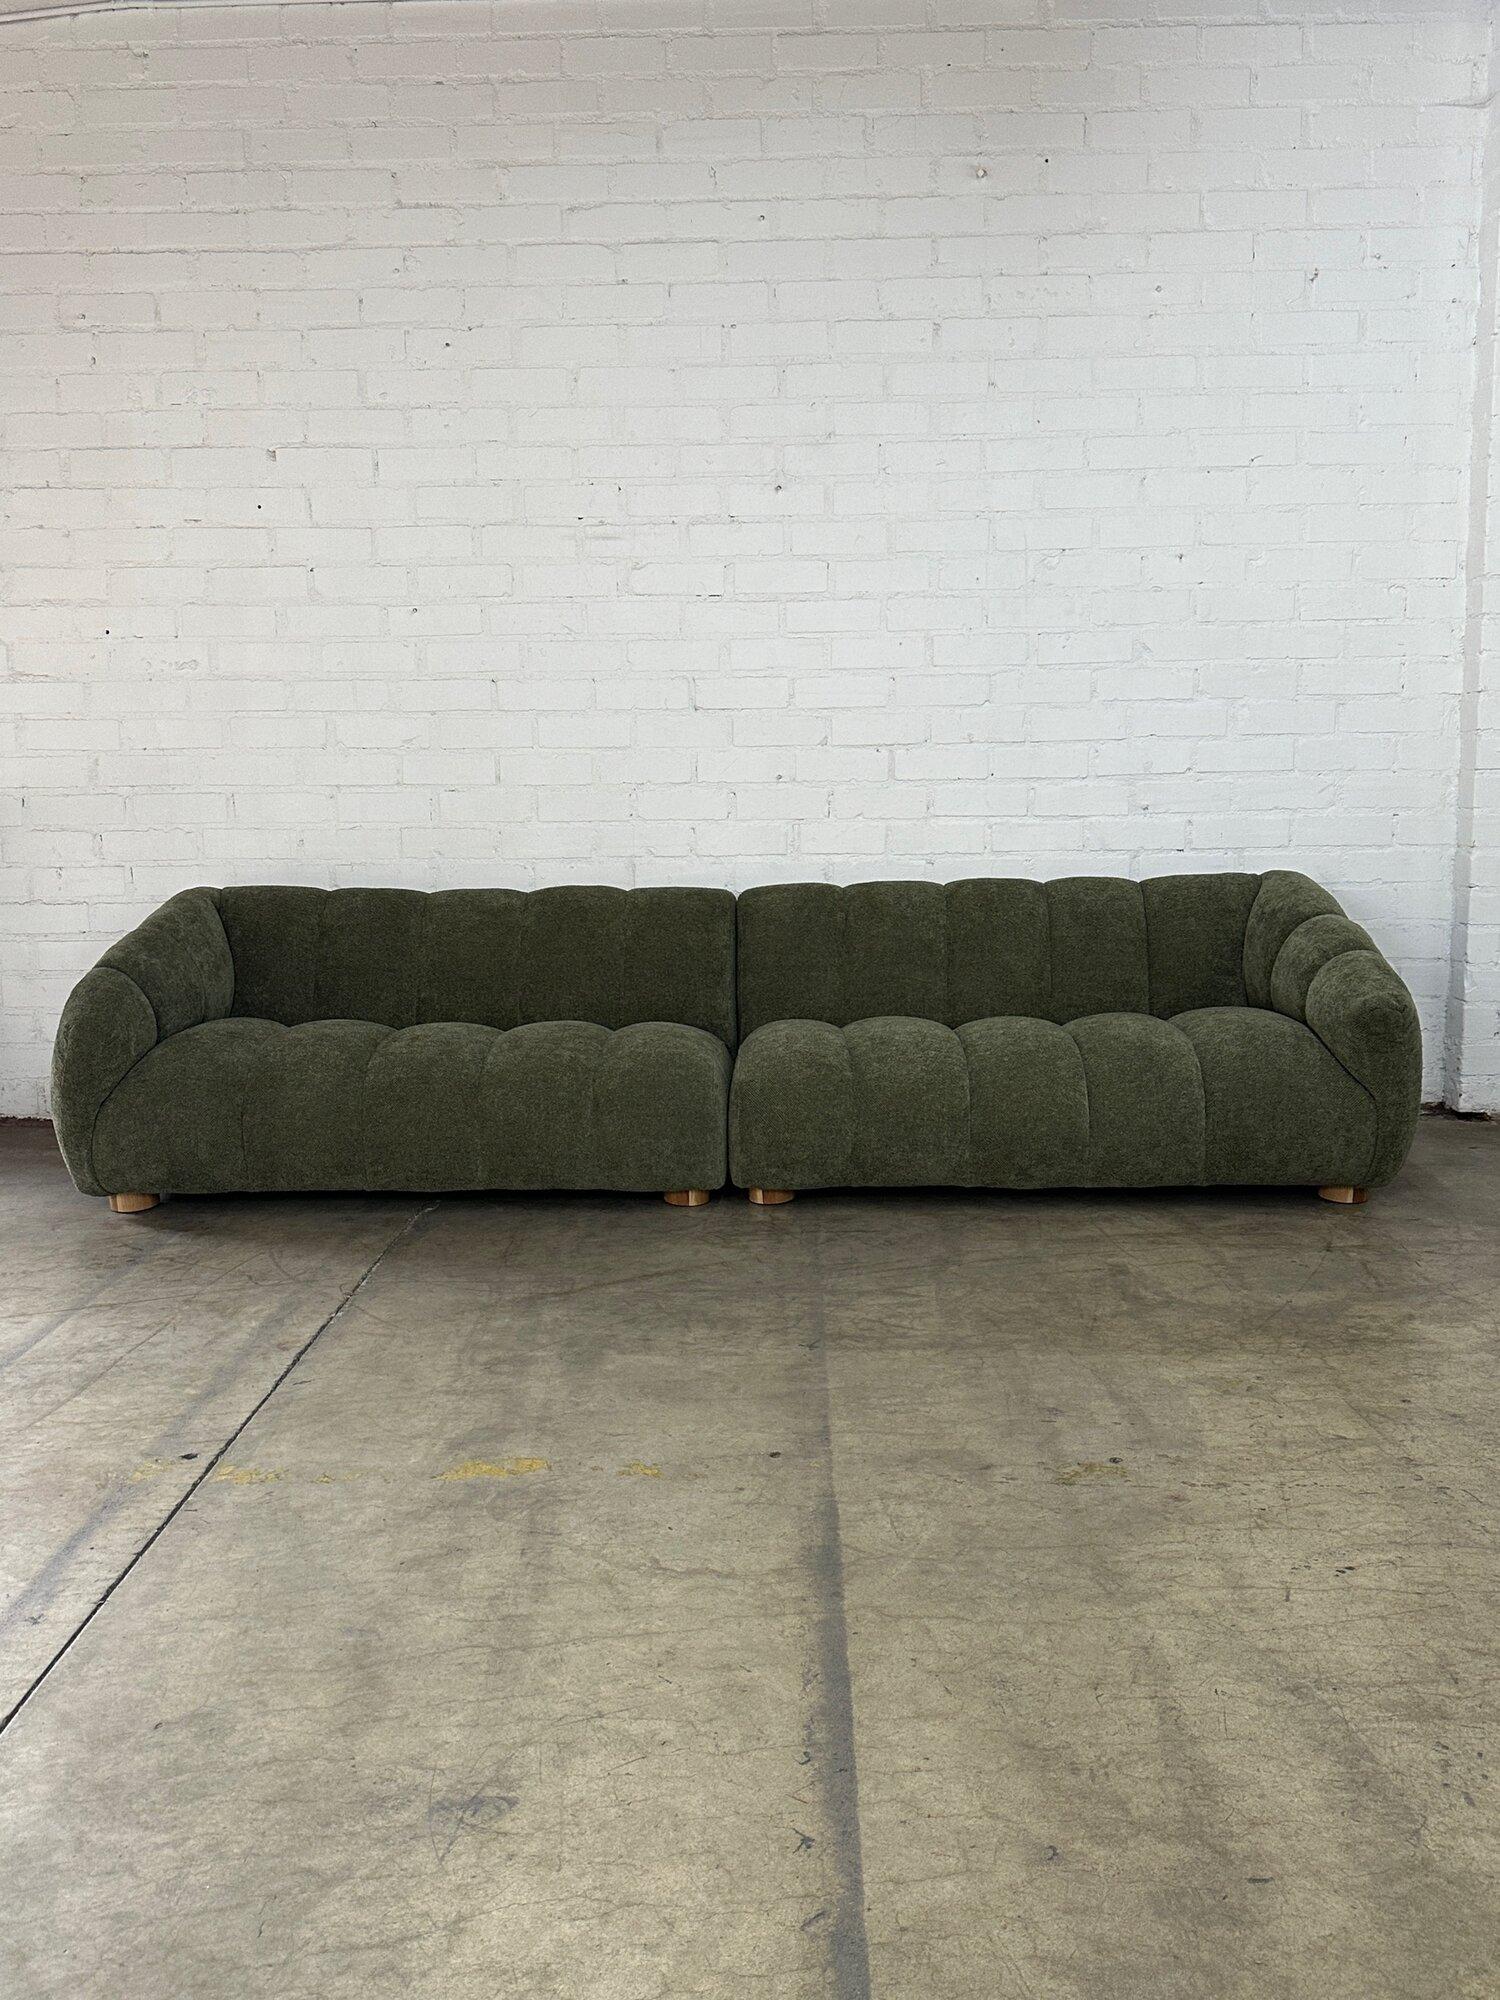 Organic Modern Low Profile Channel Sectional